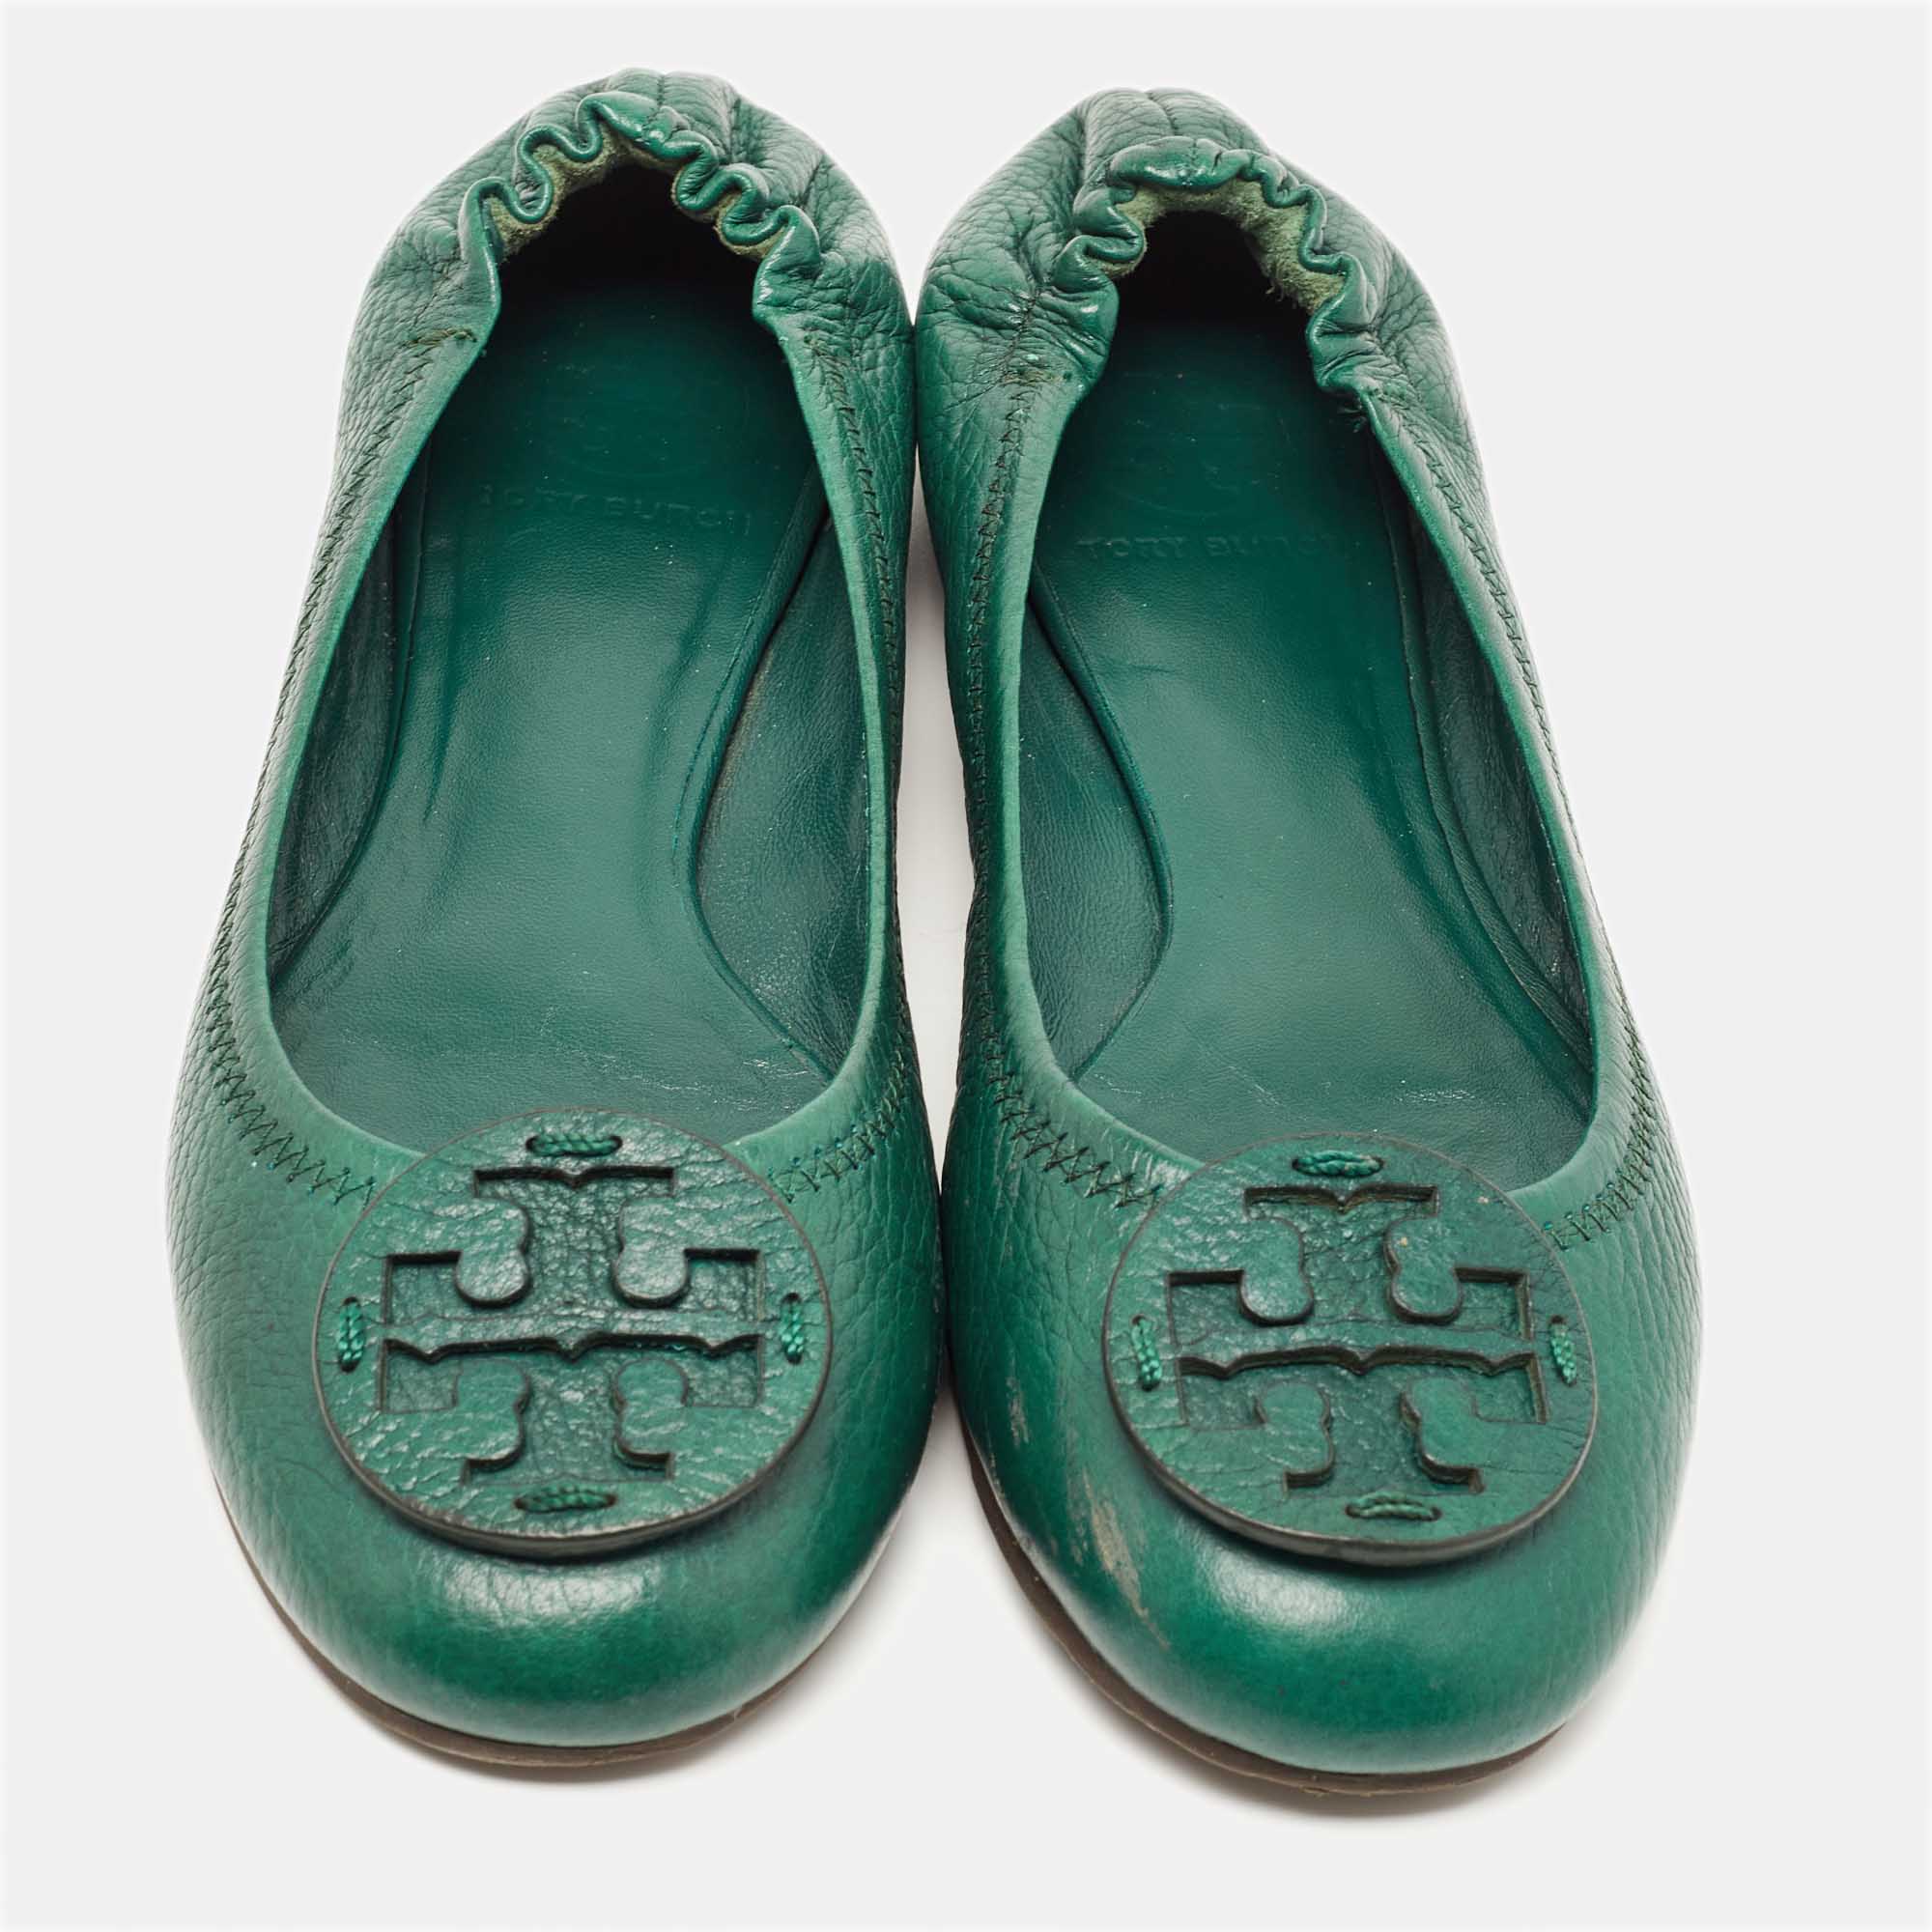 Tory Burch Green Leather Minnie Travel Ballet Flats Size 37.5